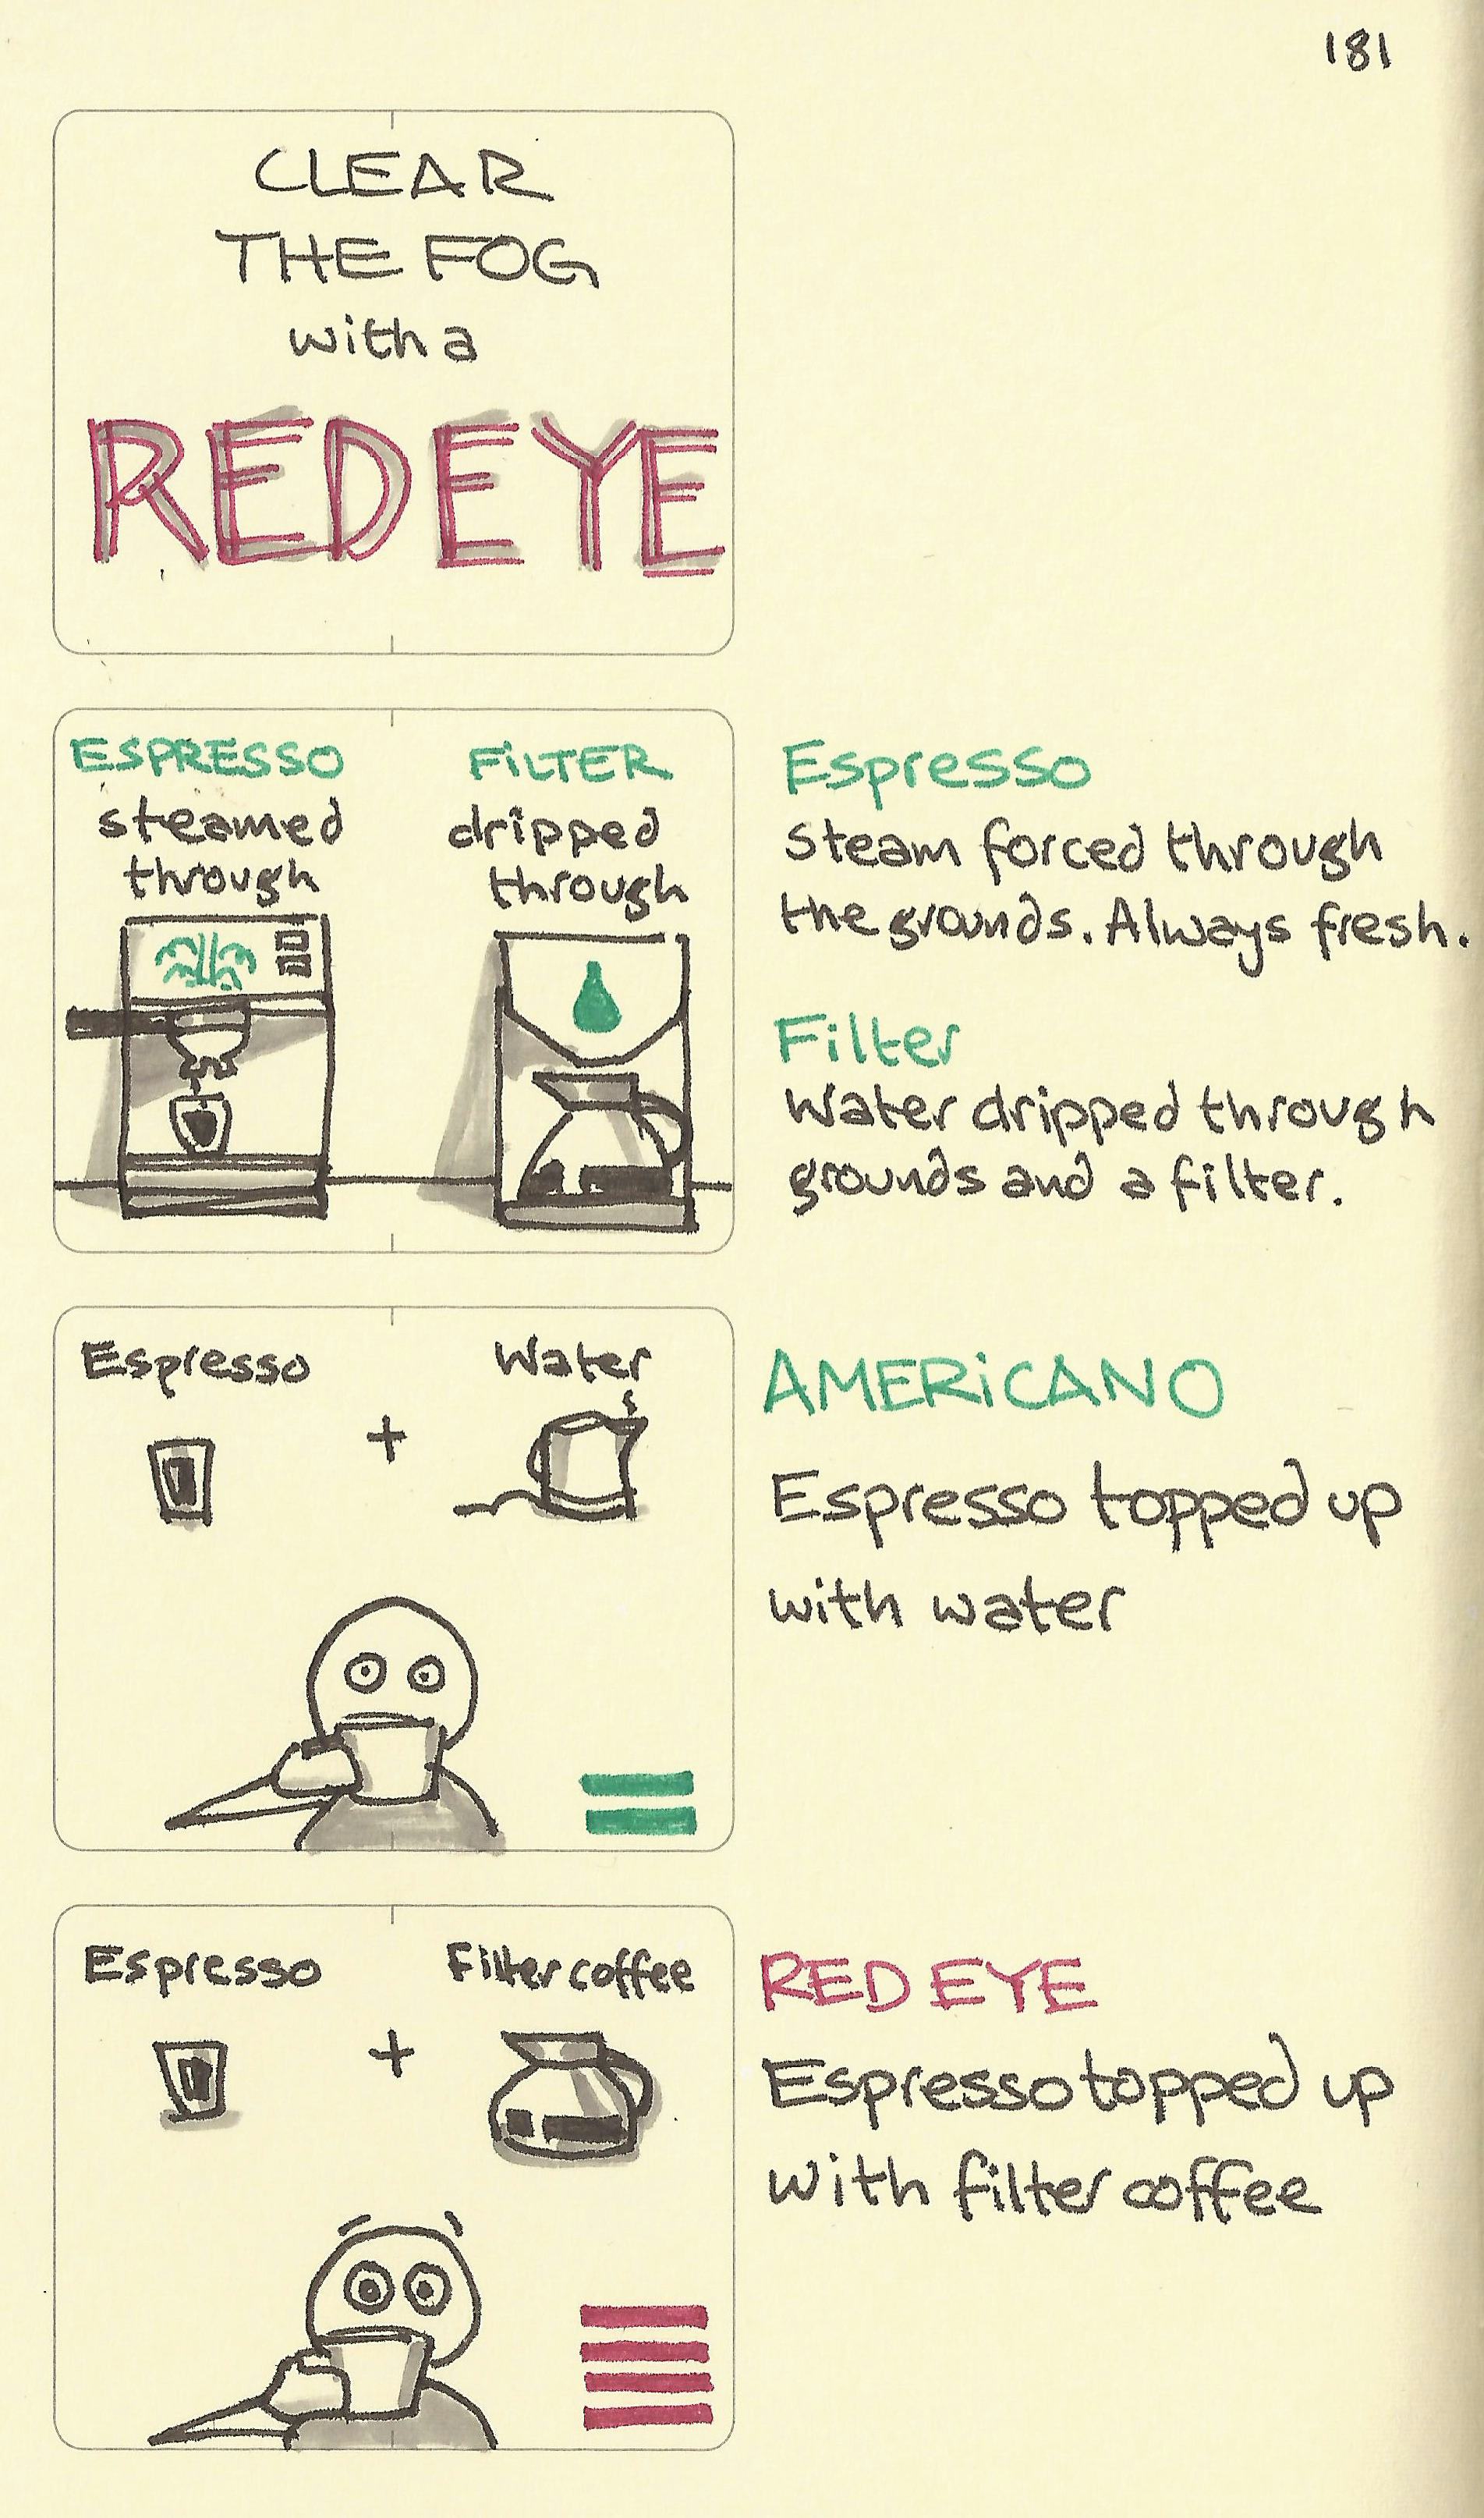 Clear the fog with a redeye - Sketchplanations